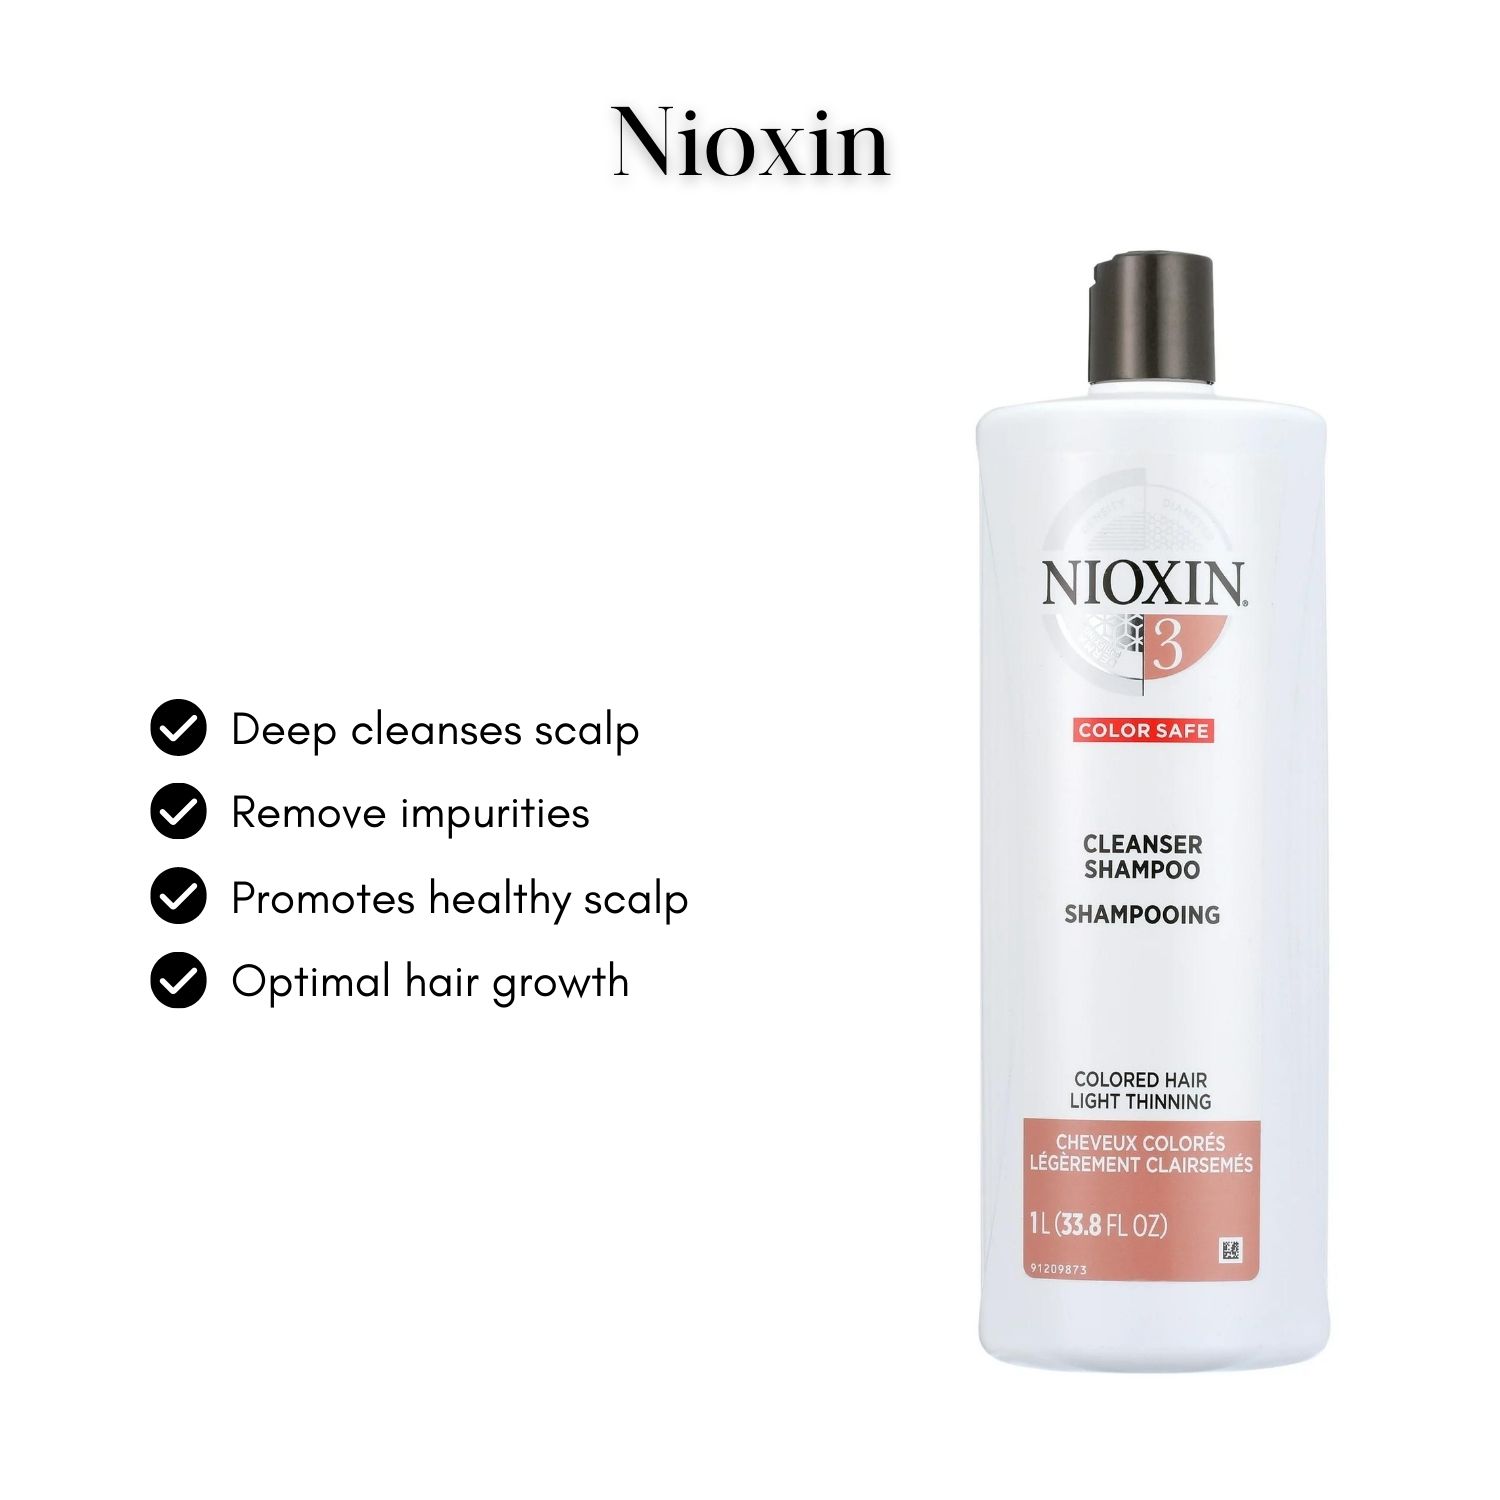 Nioxin System 3 Cleanser Shampoo, for Light Thinning Colored Hair, 33.8 oz - image 5 of 6